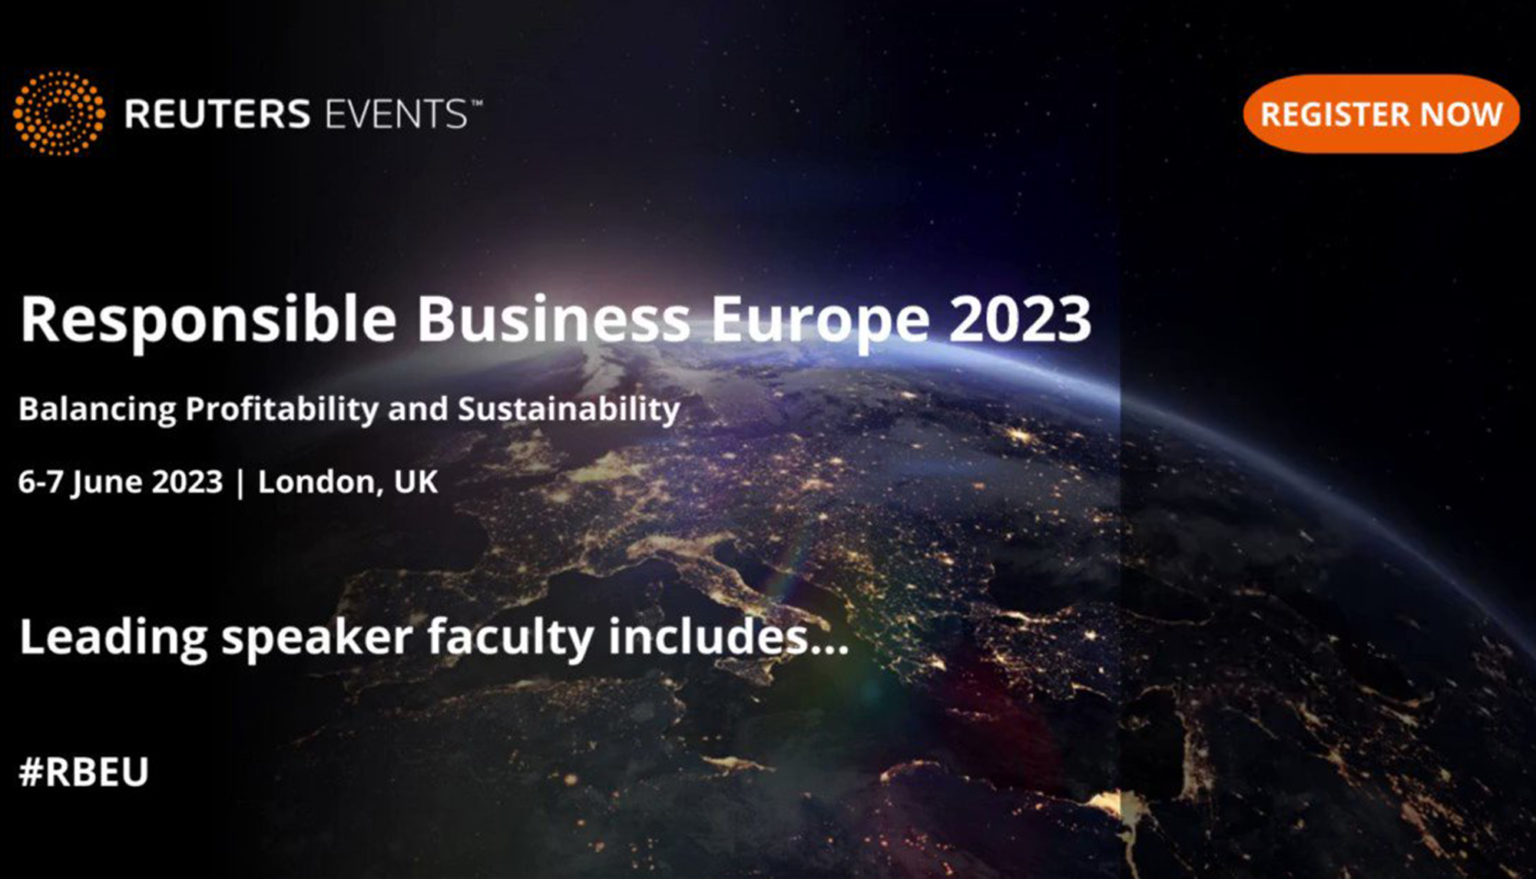 Reuters Events Responsible Business Europe 2023 Sustainability Events